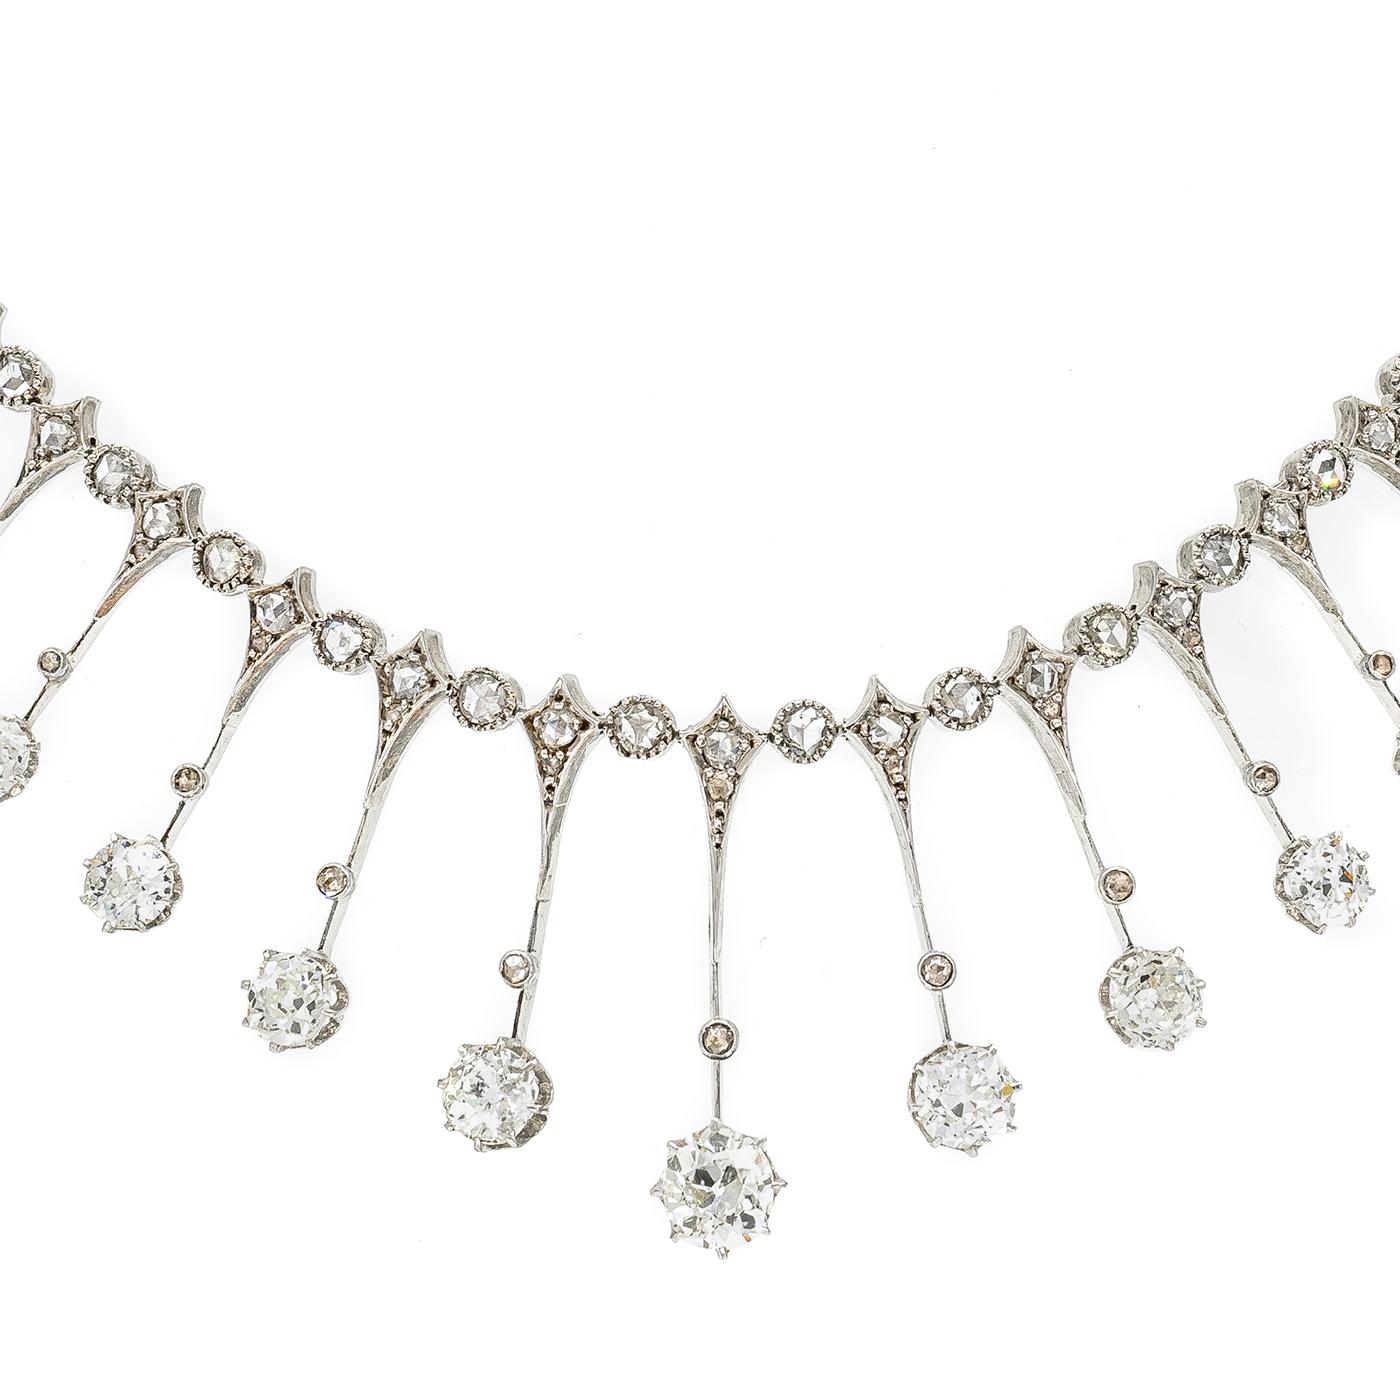 Antique Diamond Fringe Tiara Necklace, Silver Upon Gold, circa 1910 In Good Condition For Sale In London, GB